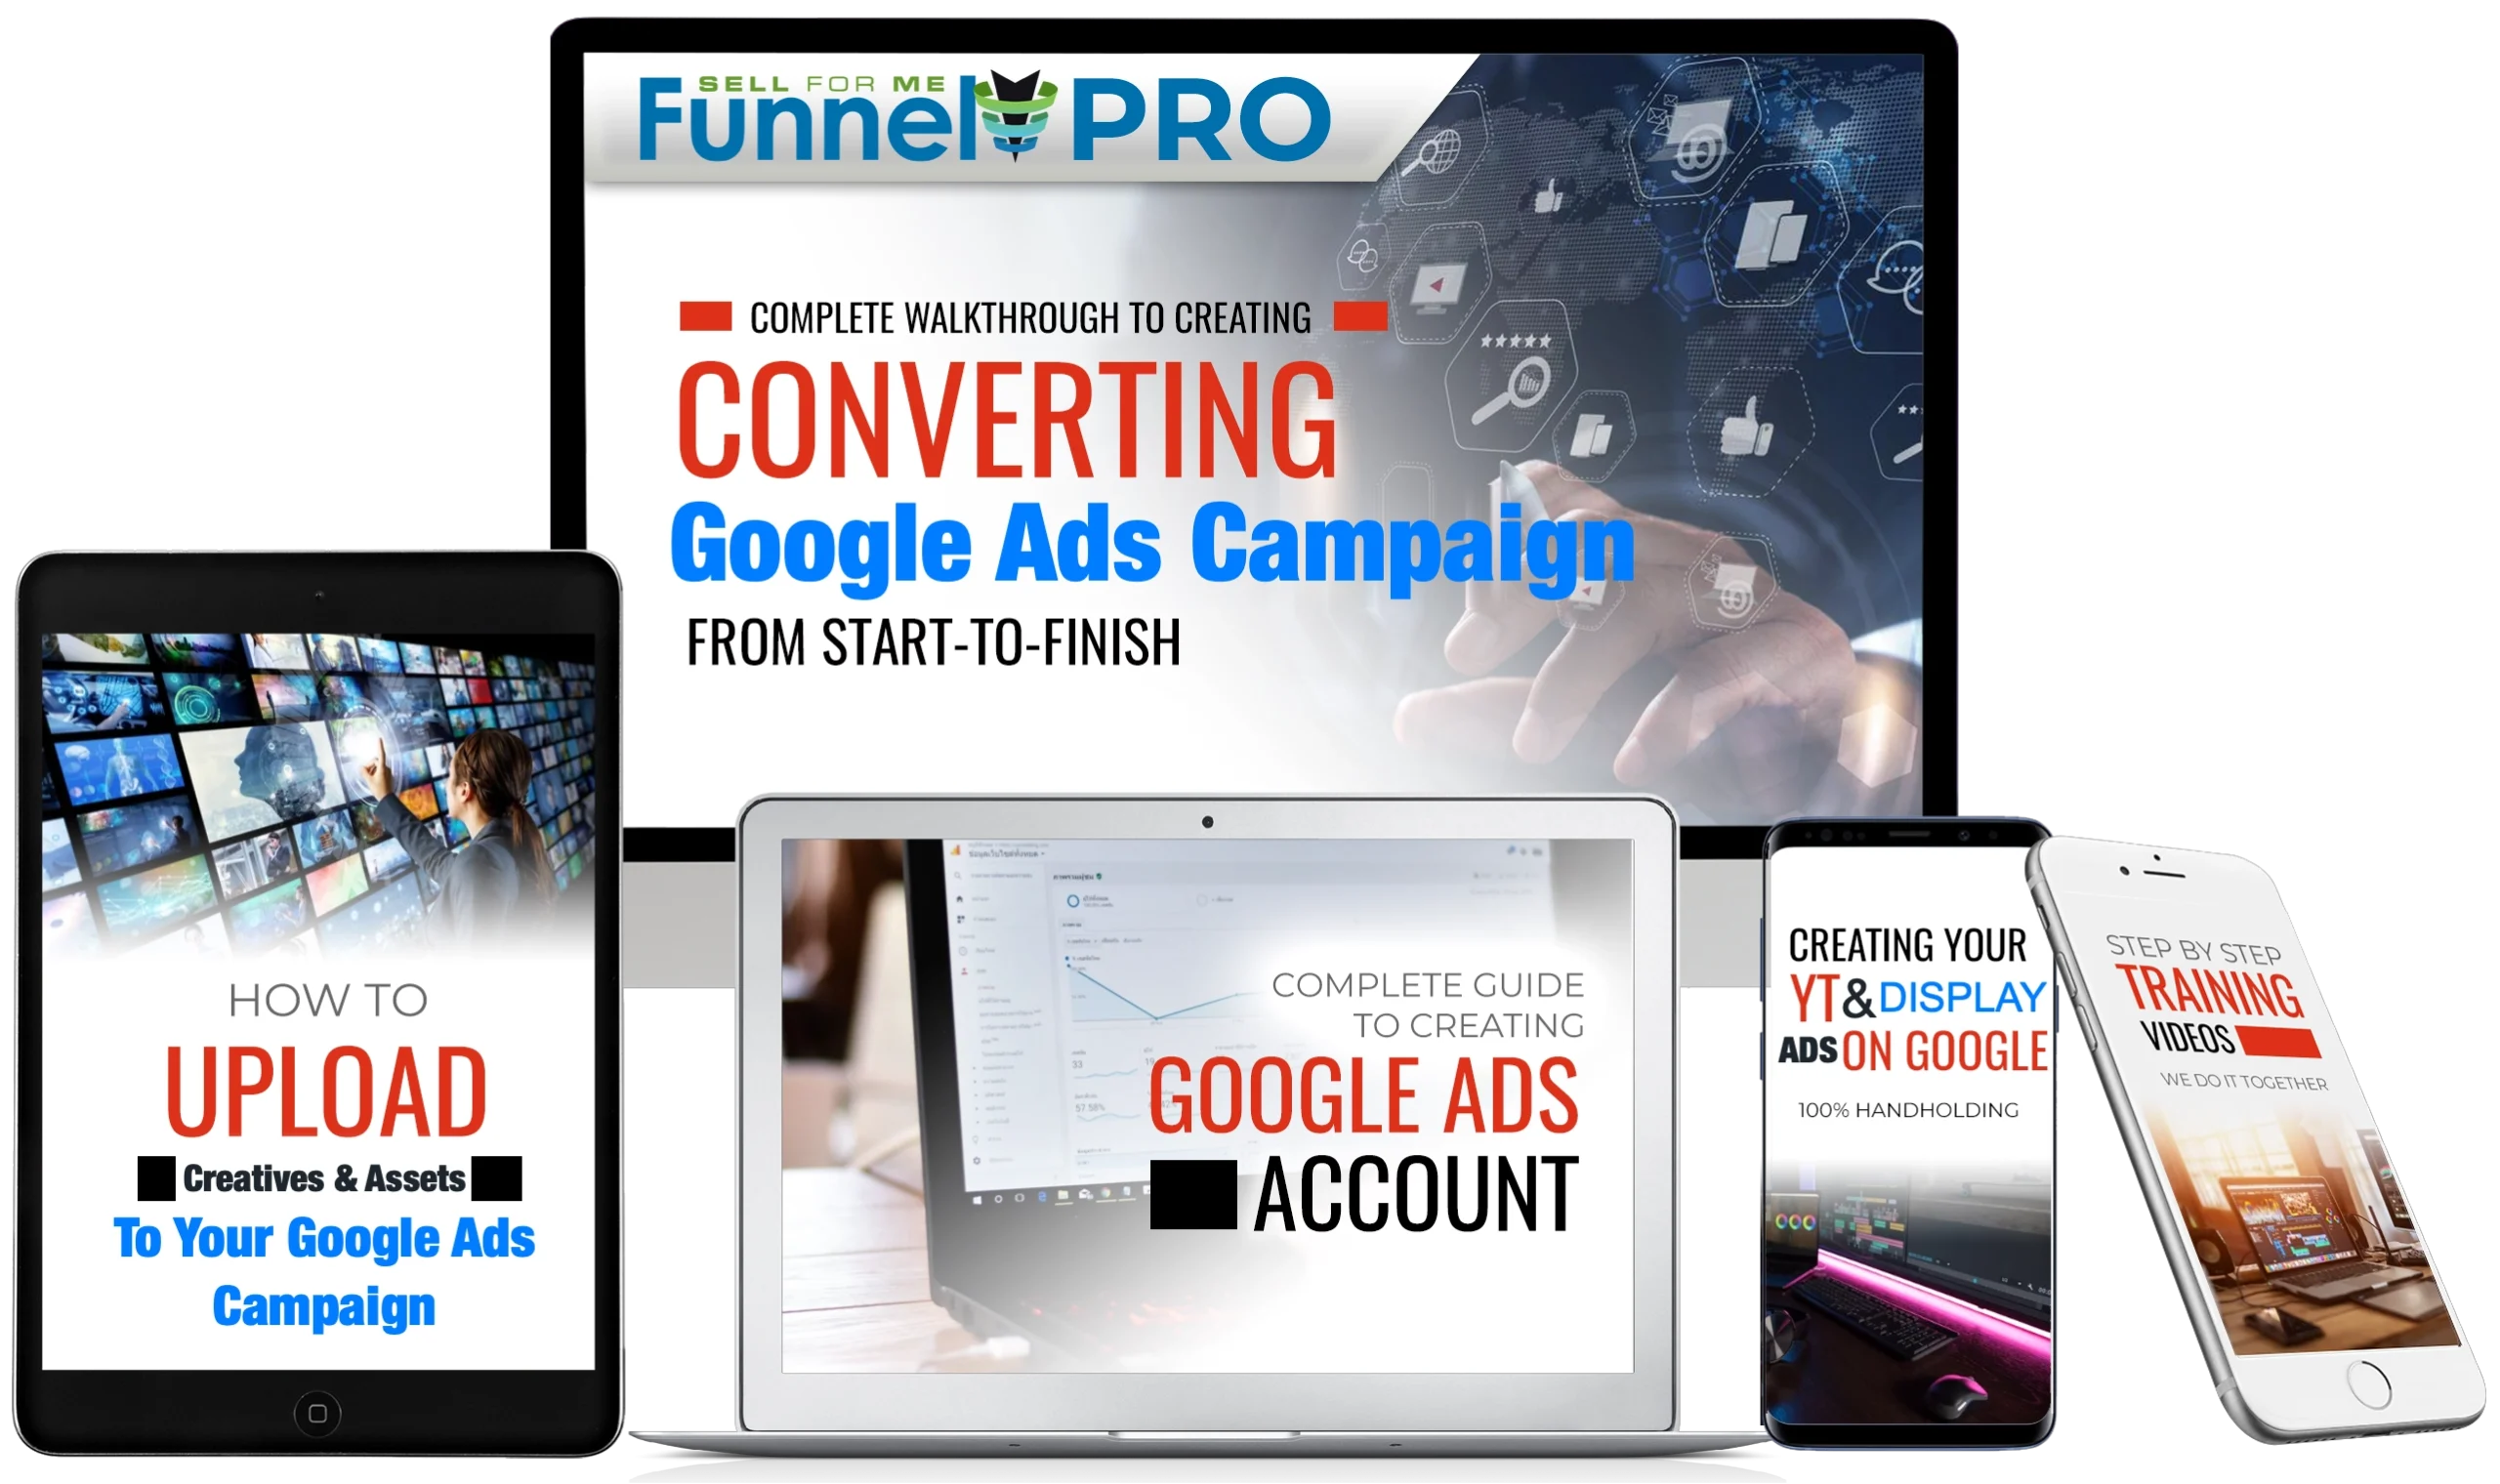 Day 10-14 Start Your Google Ads Campaign